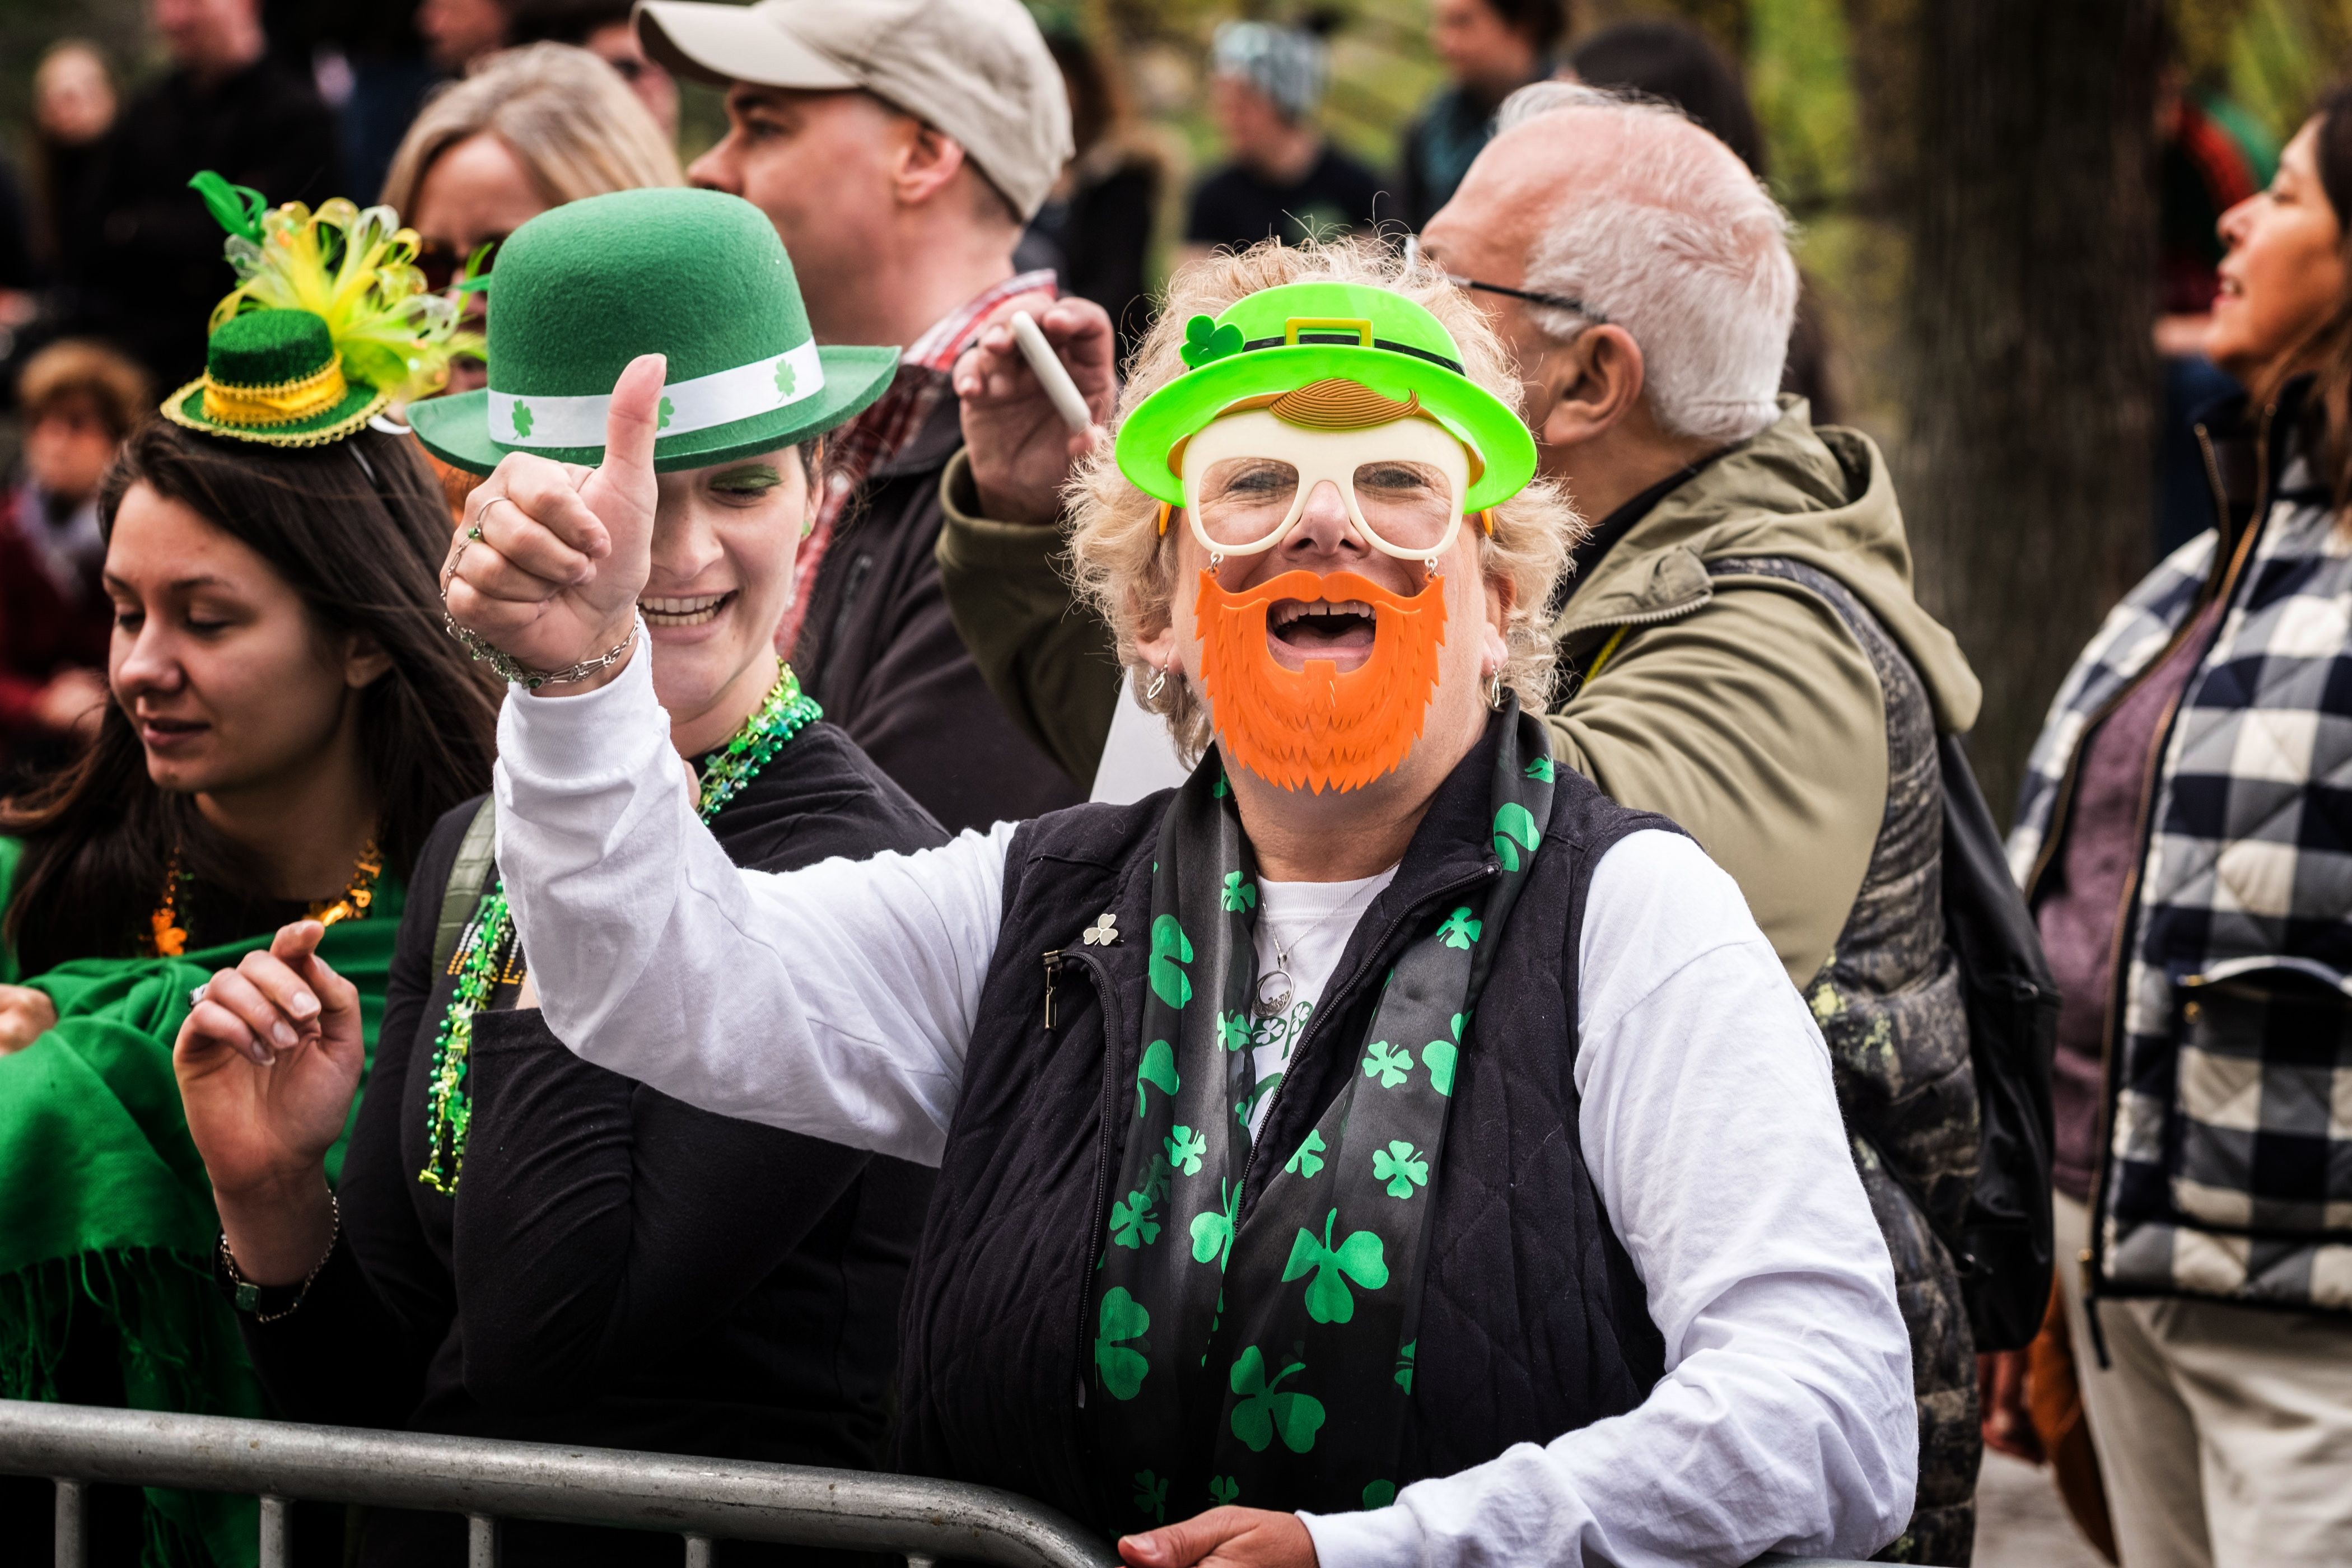 NEW YORK, NY - MARCH 17:  Attendees seen at the 255th annual St. Patrick's Day Parade along Fifth Avenue in New York City on March 17, 2016 in New York City.  (Photo by Larry Busacca/Getty Images) (Foto: Getty Images)